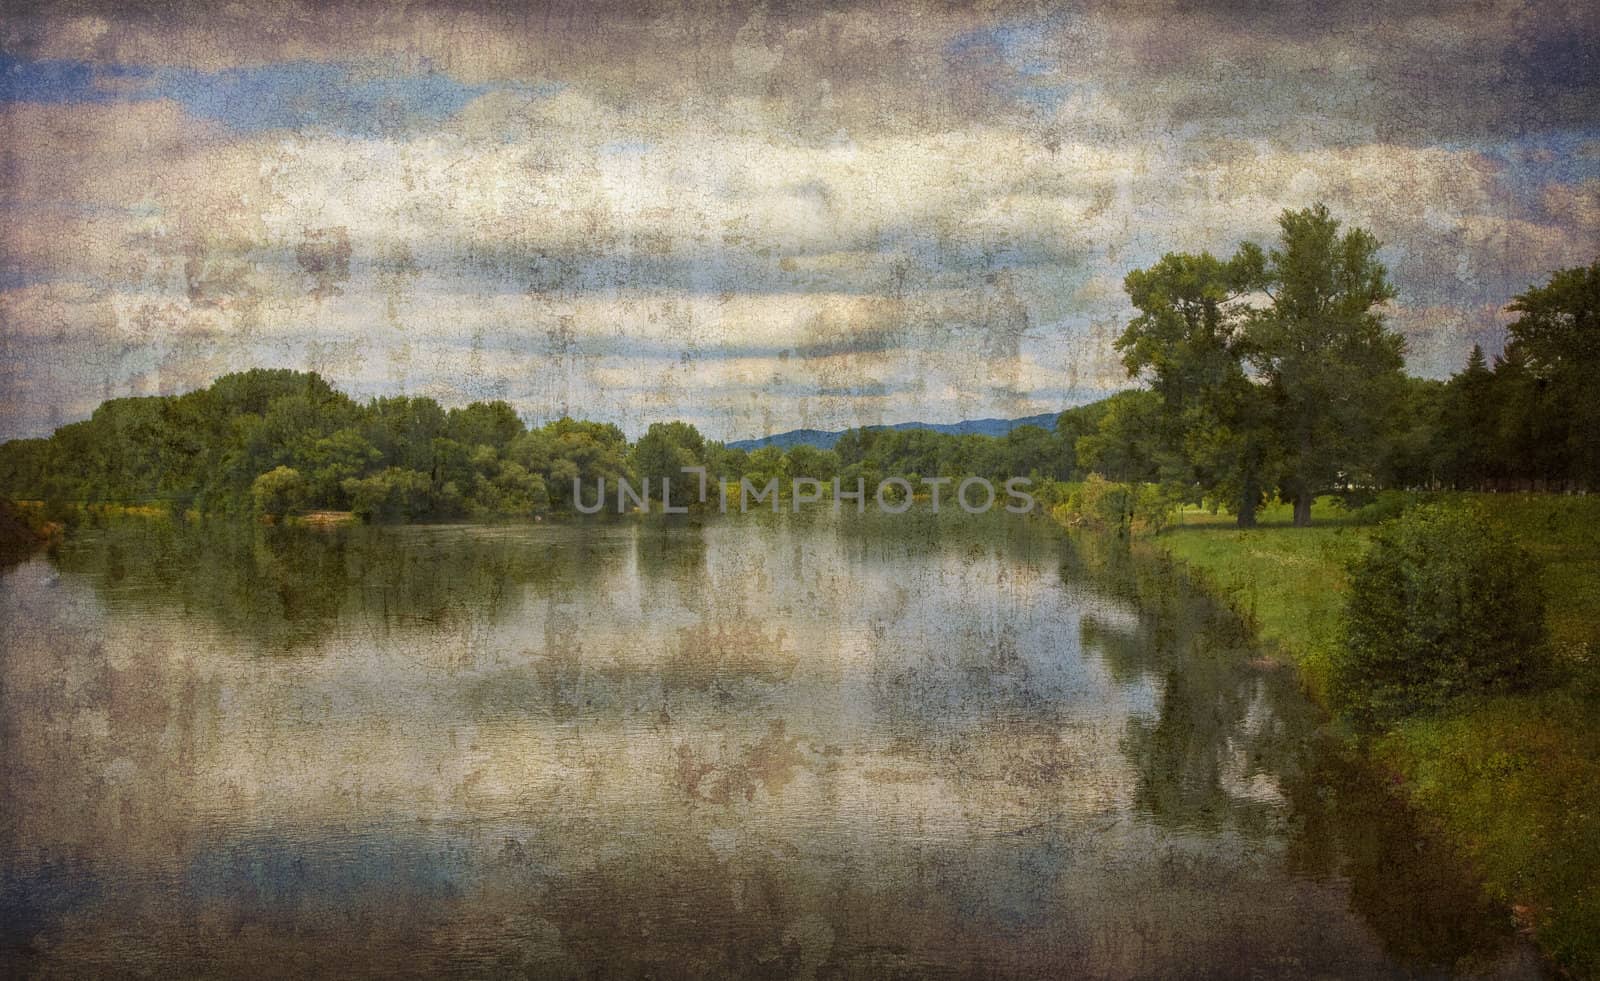 River Vah, Piestany, Slavakia. Artwork made of more of my captures to give a retro look.